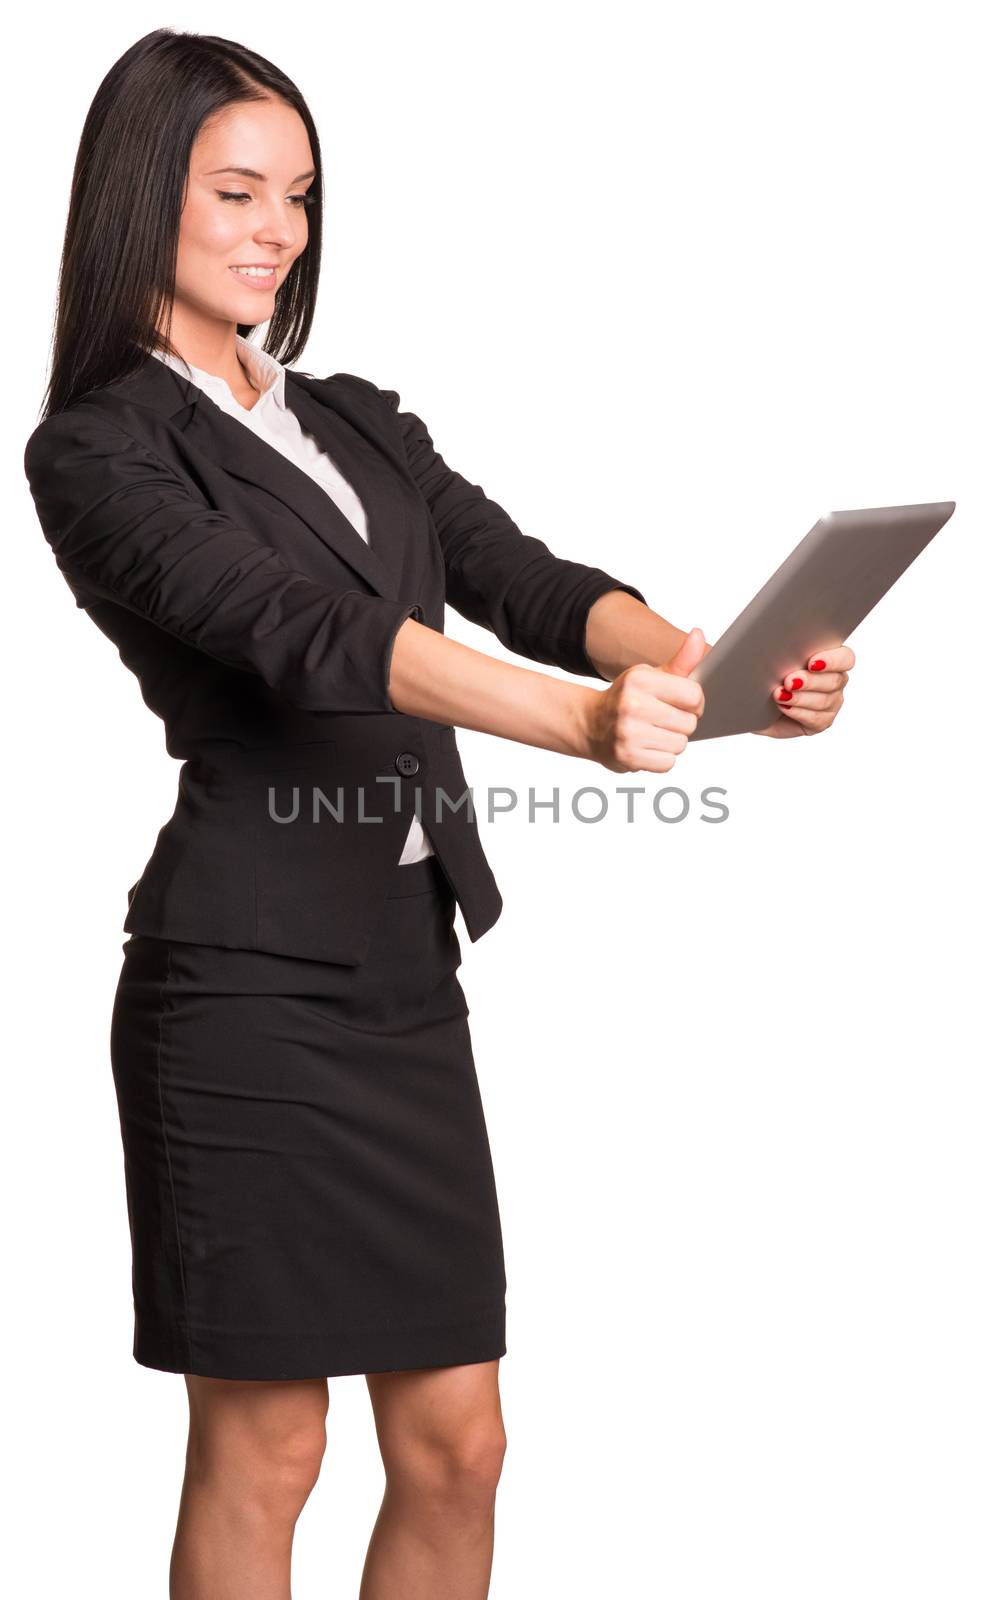 Beautiful businesswoman in suit photographs herself using the tablet. Isolated on white background